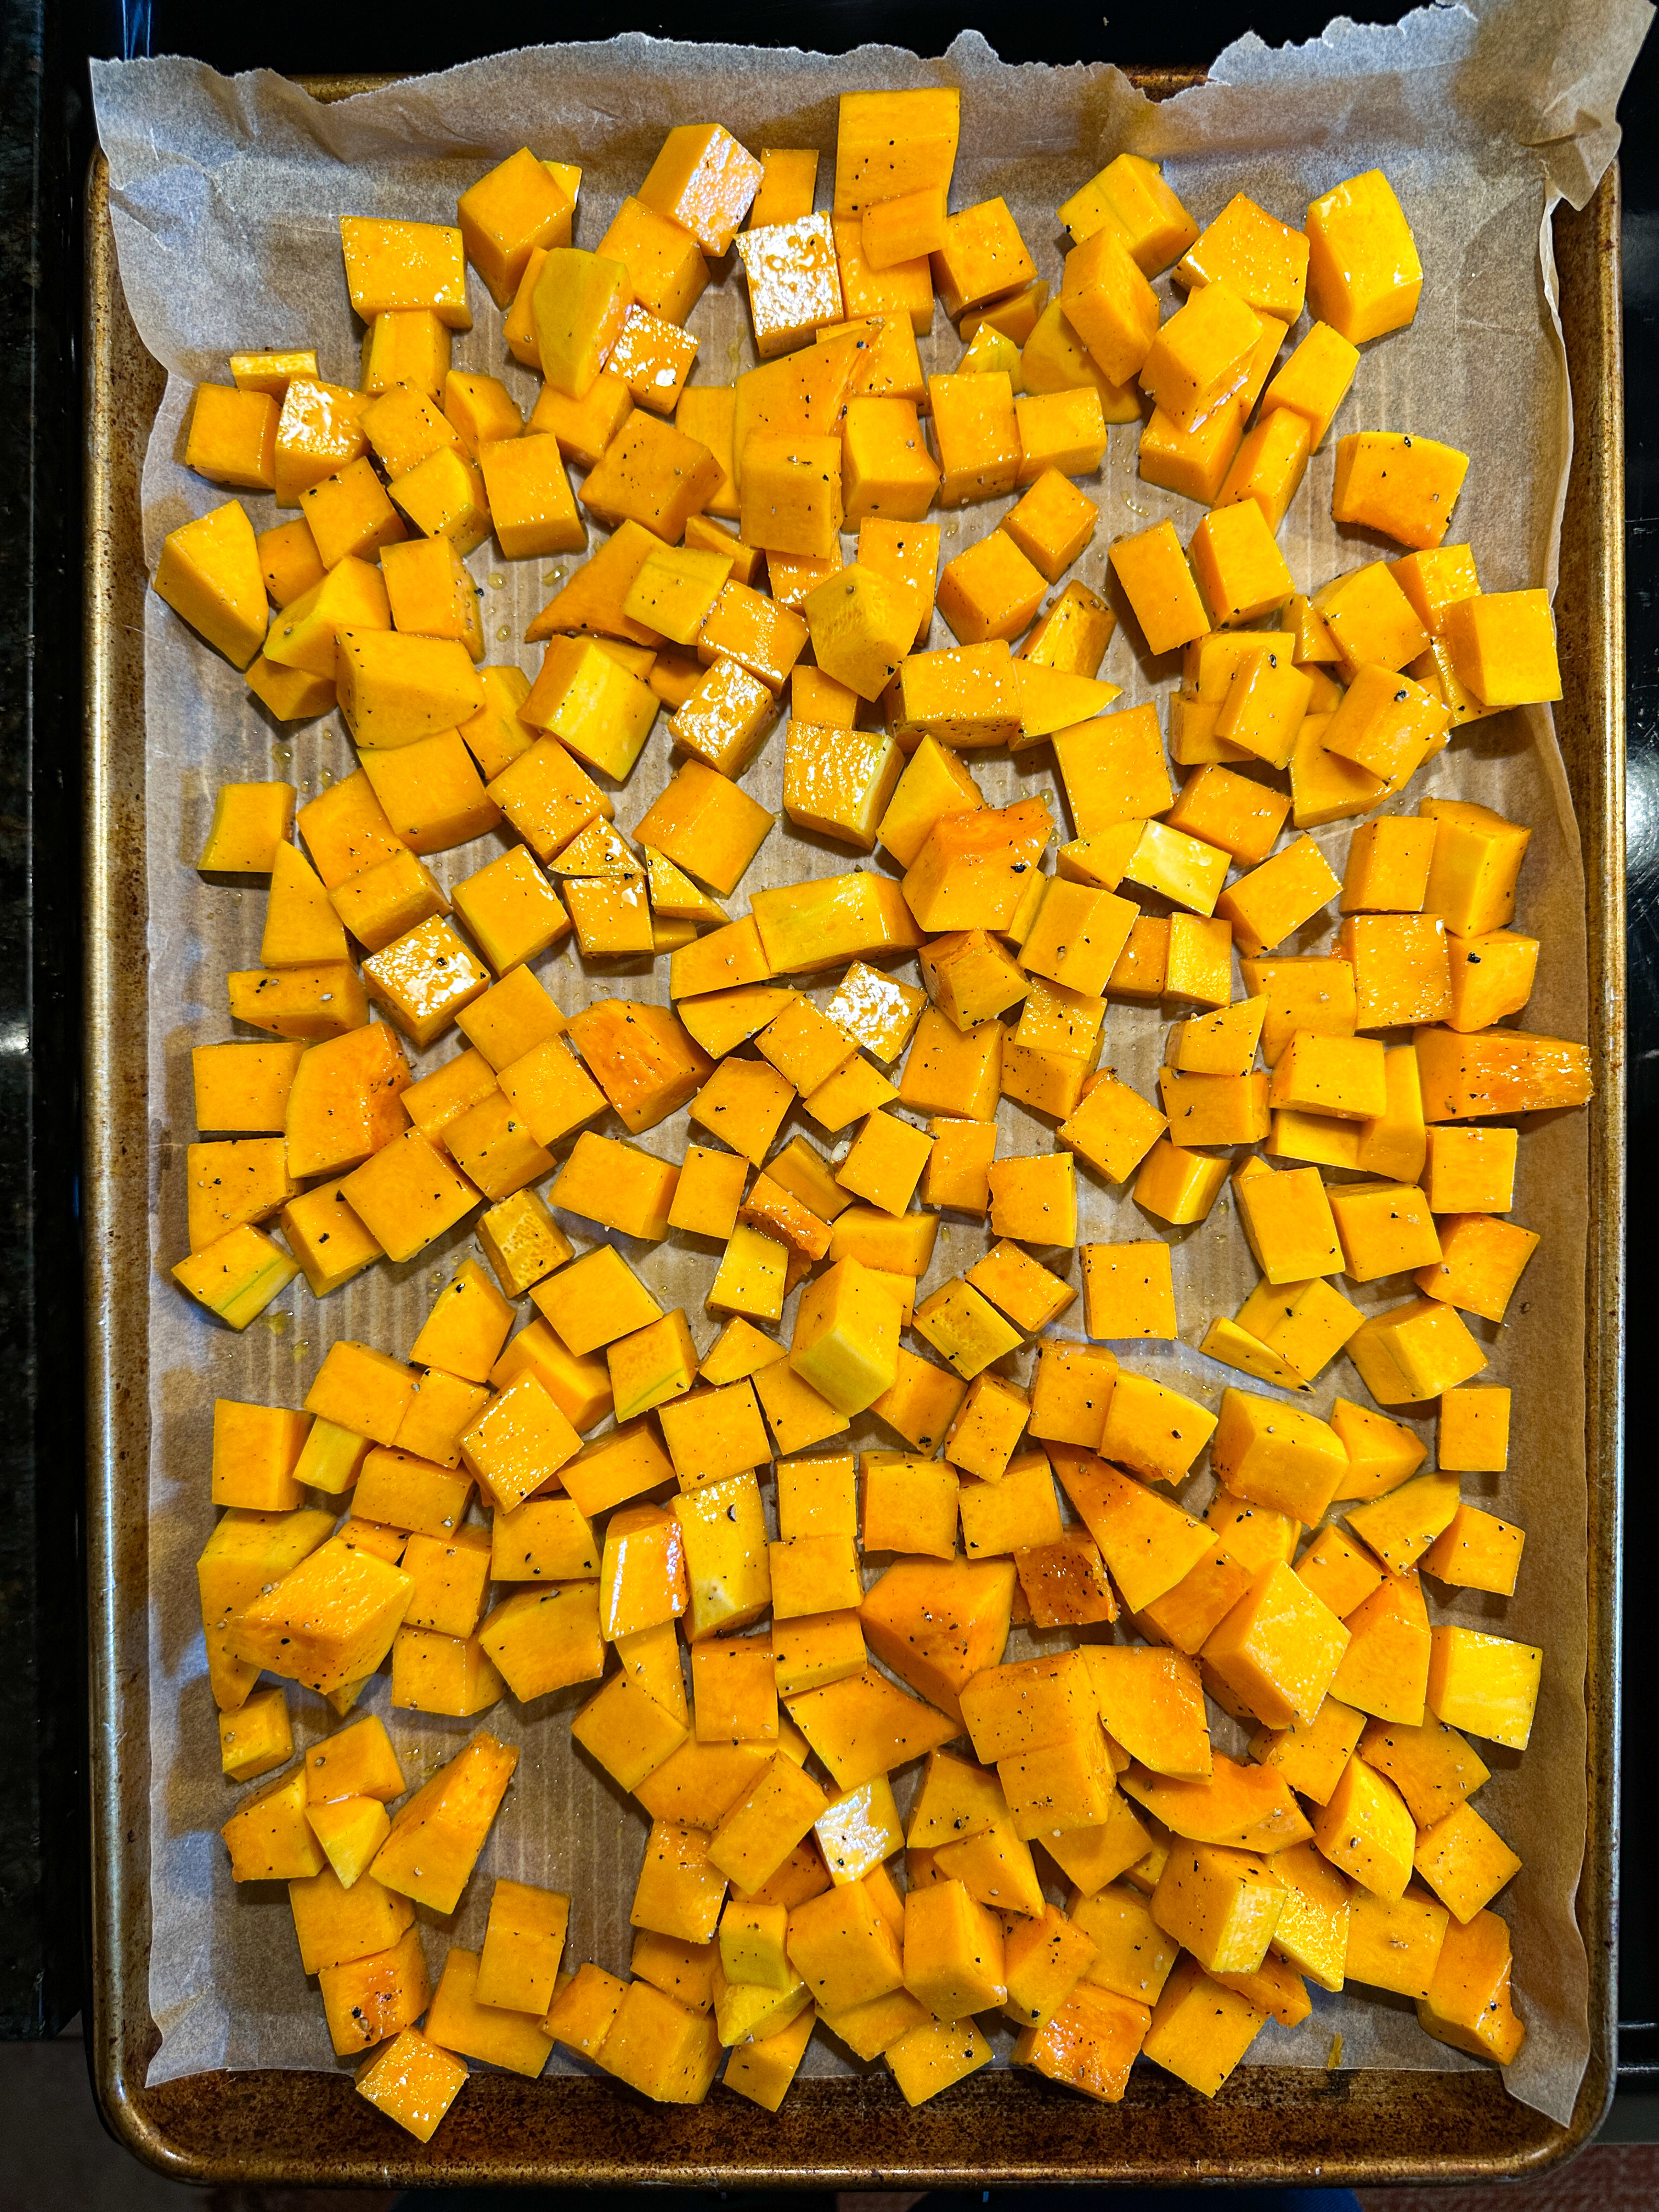 Diced butternut squash on a sheet pan, uncooked